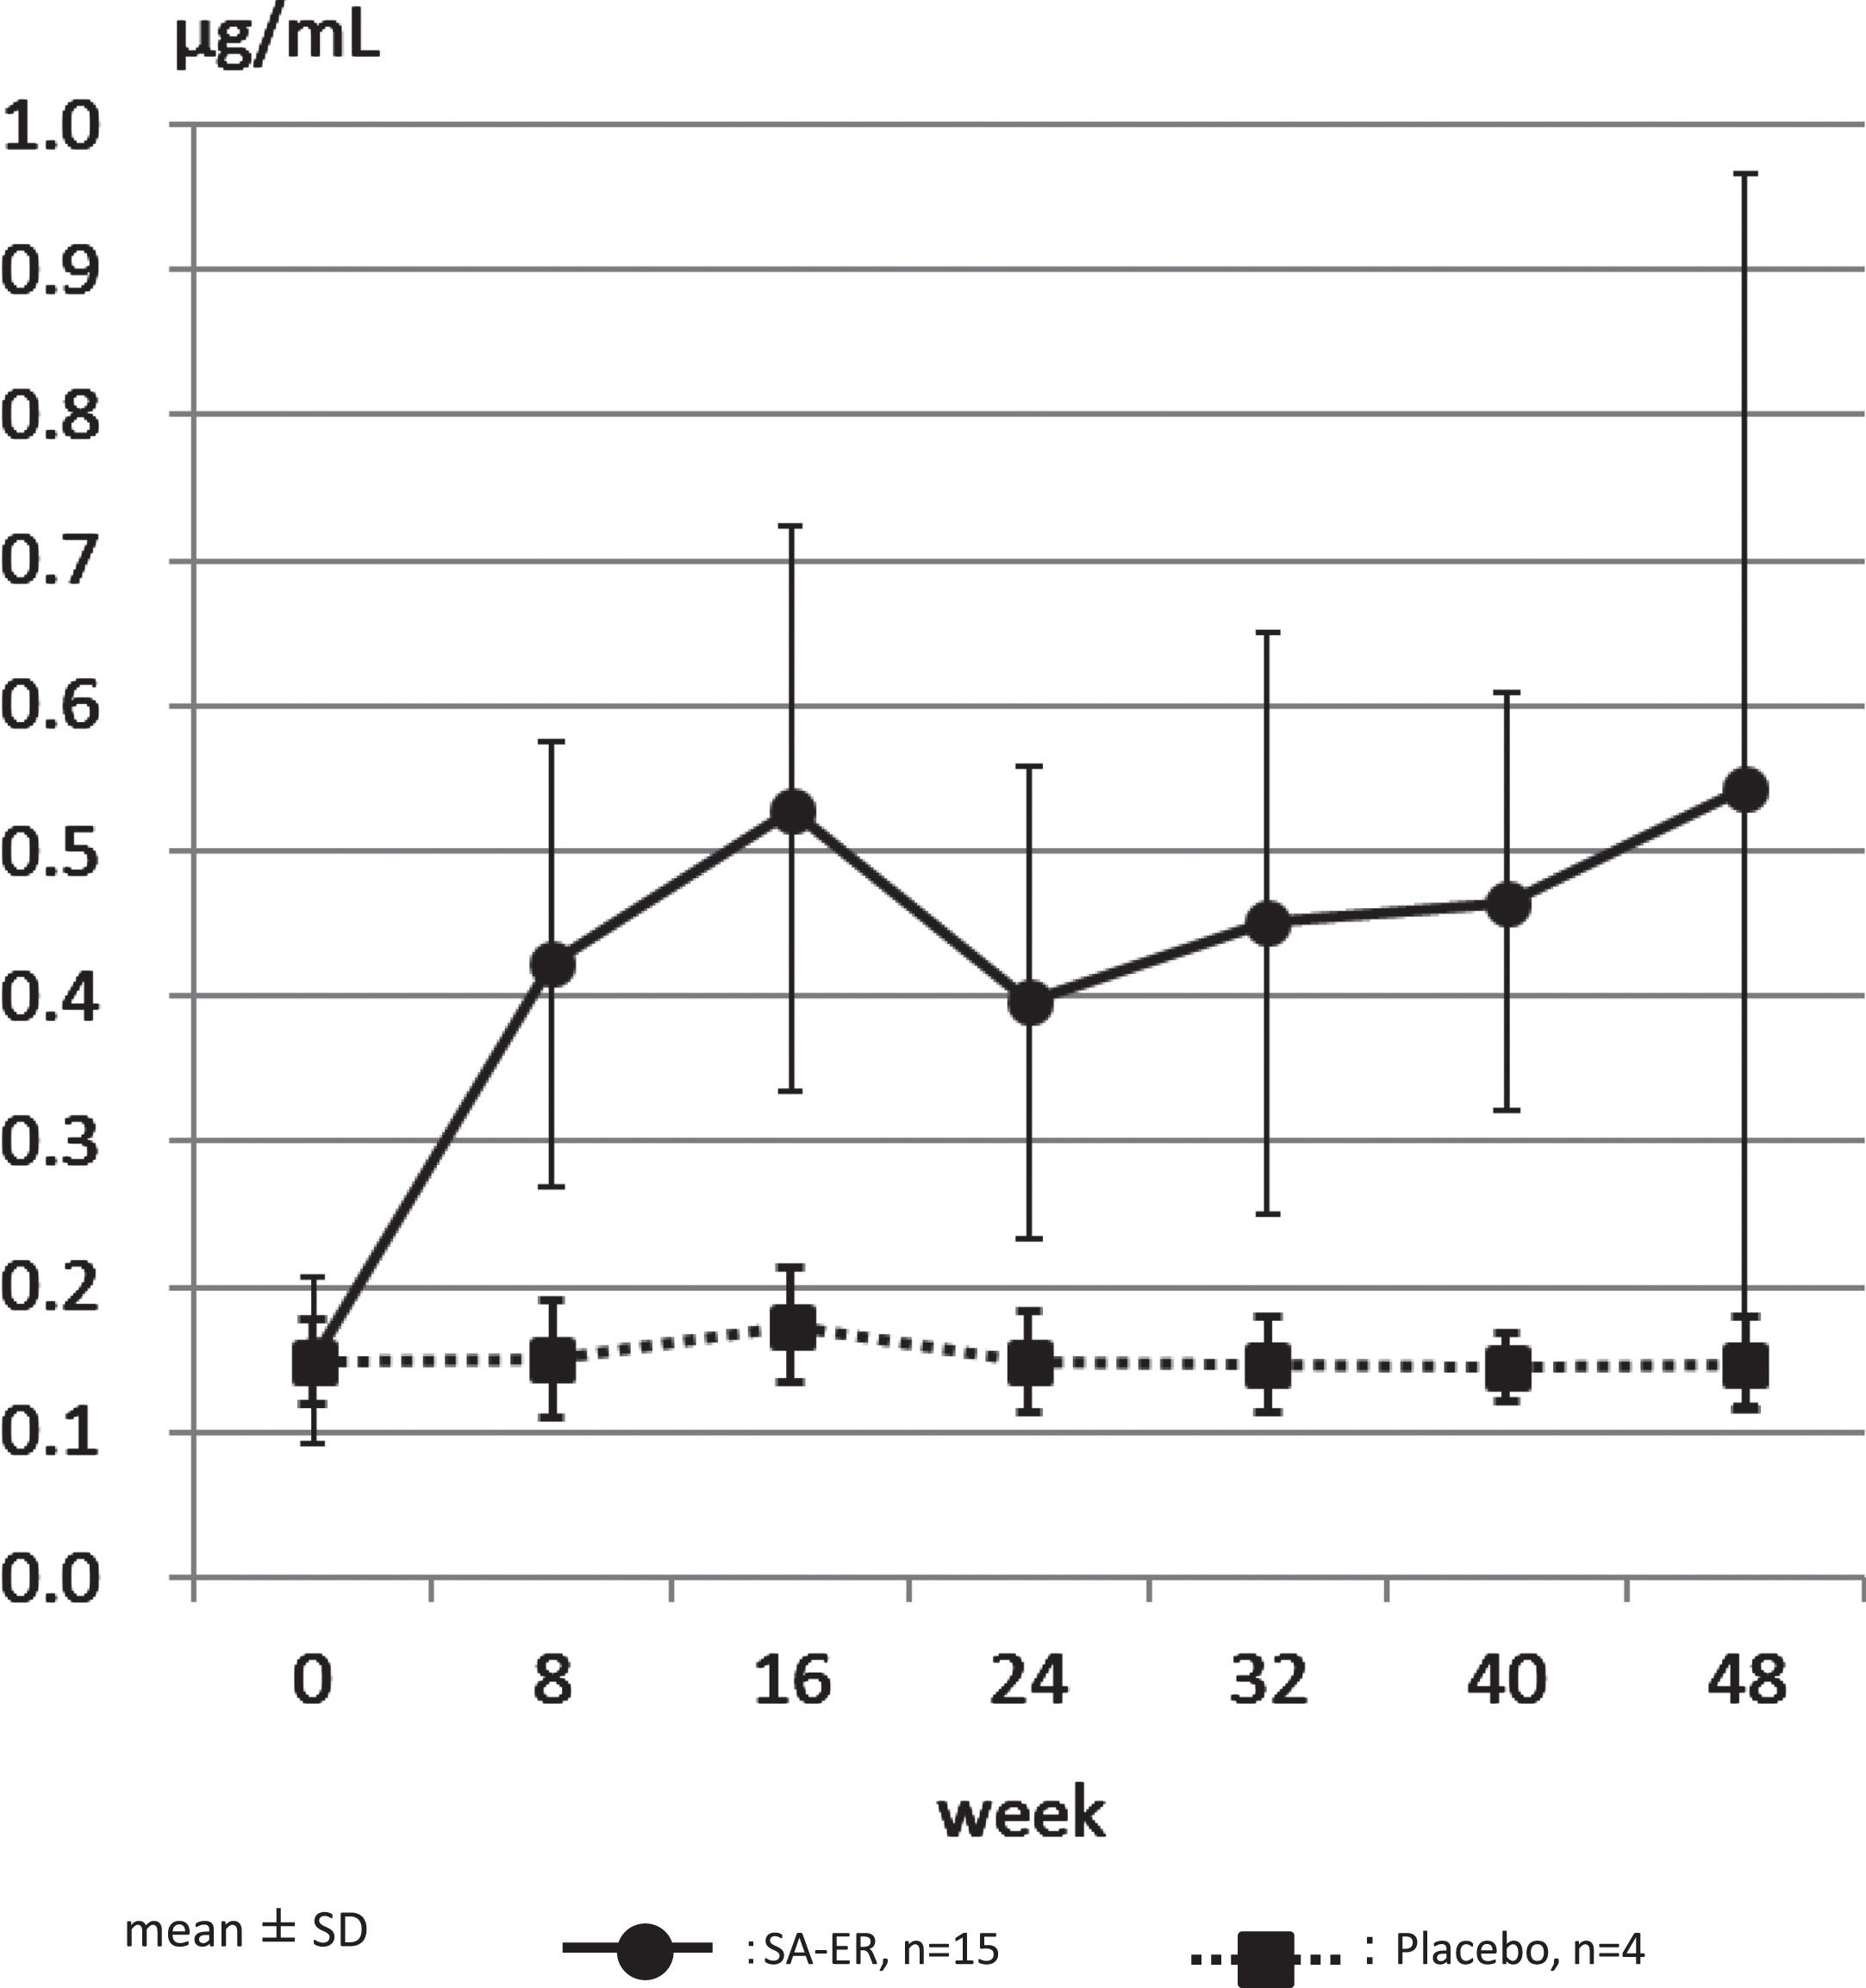 Serum free aceneuramic concentration. The concentration of serum free aceneuramic acid measured was 0.150±0.058μg/mL (mean±standard deviation) before administration and 0.543±0.424μg/mL after 48 weeks of administration in the SA-ER group (solid line; n = 15). In comparison, 0.149±0.029 and 0.147±0.031μg/mL before and after 48 weeks of administration, respectively, in the placebo group (dotted line; n = 4).